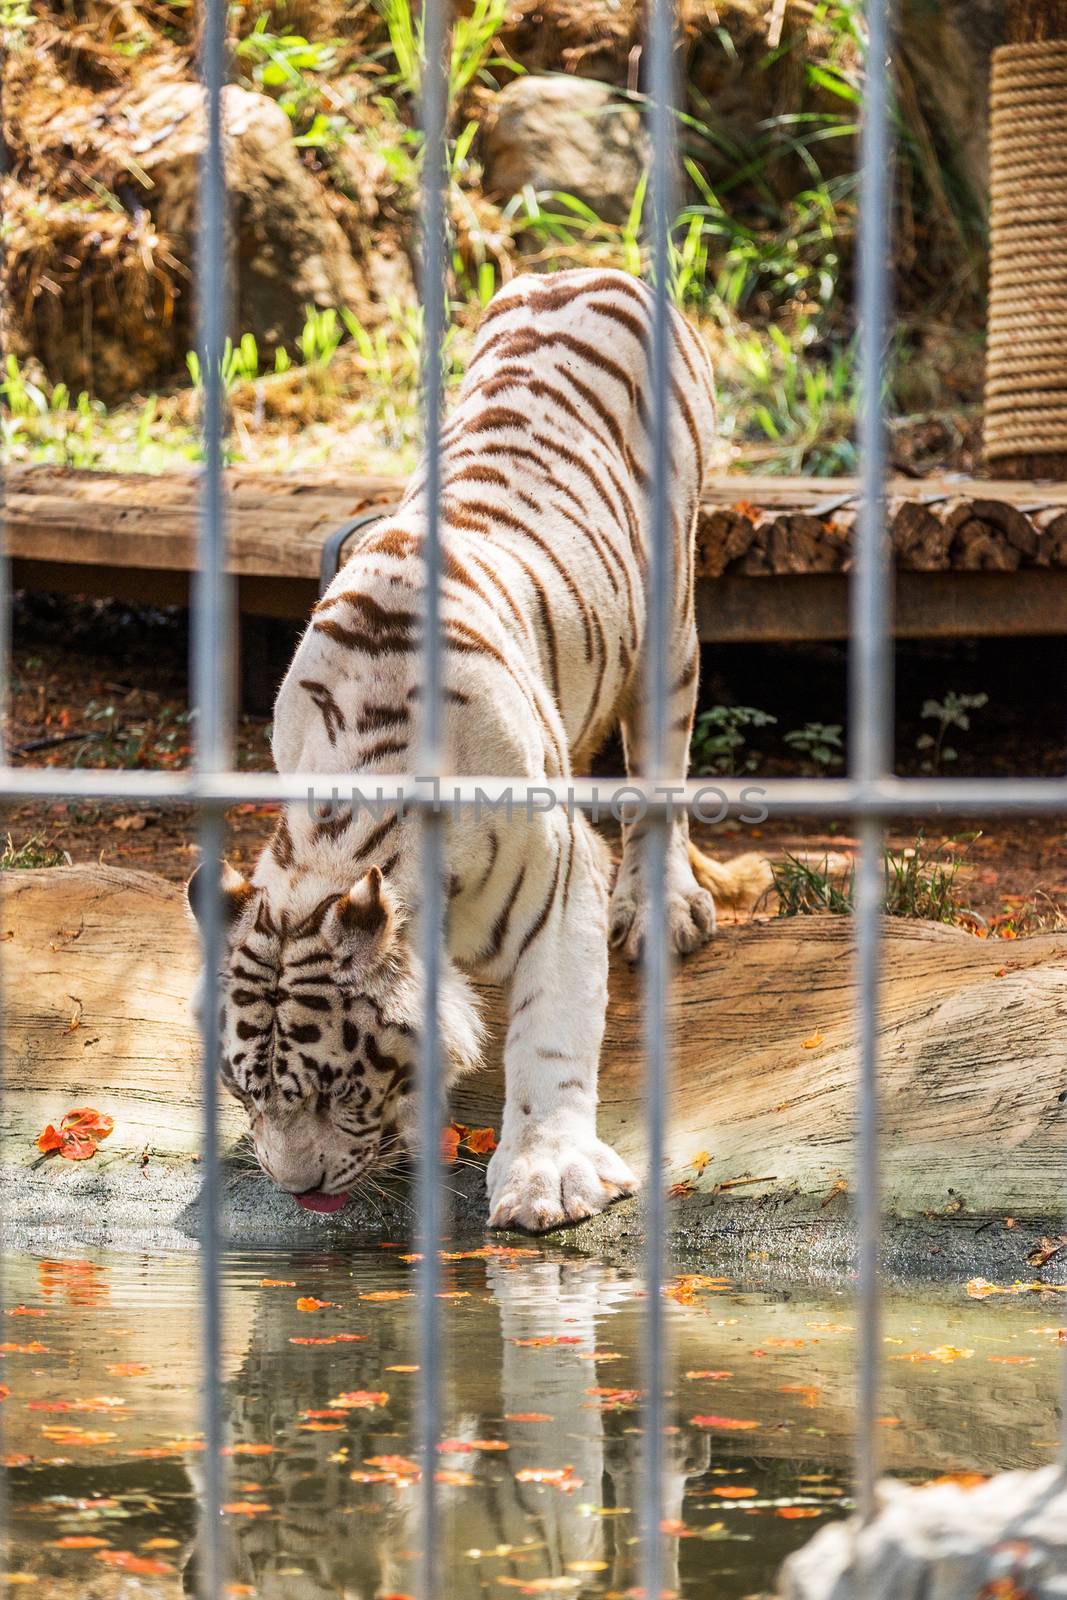 White Tiger eating water in cage by Surasak